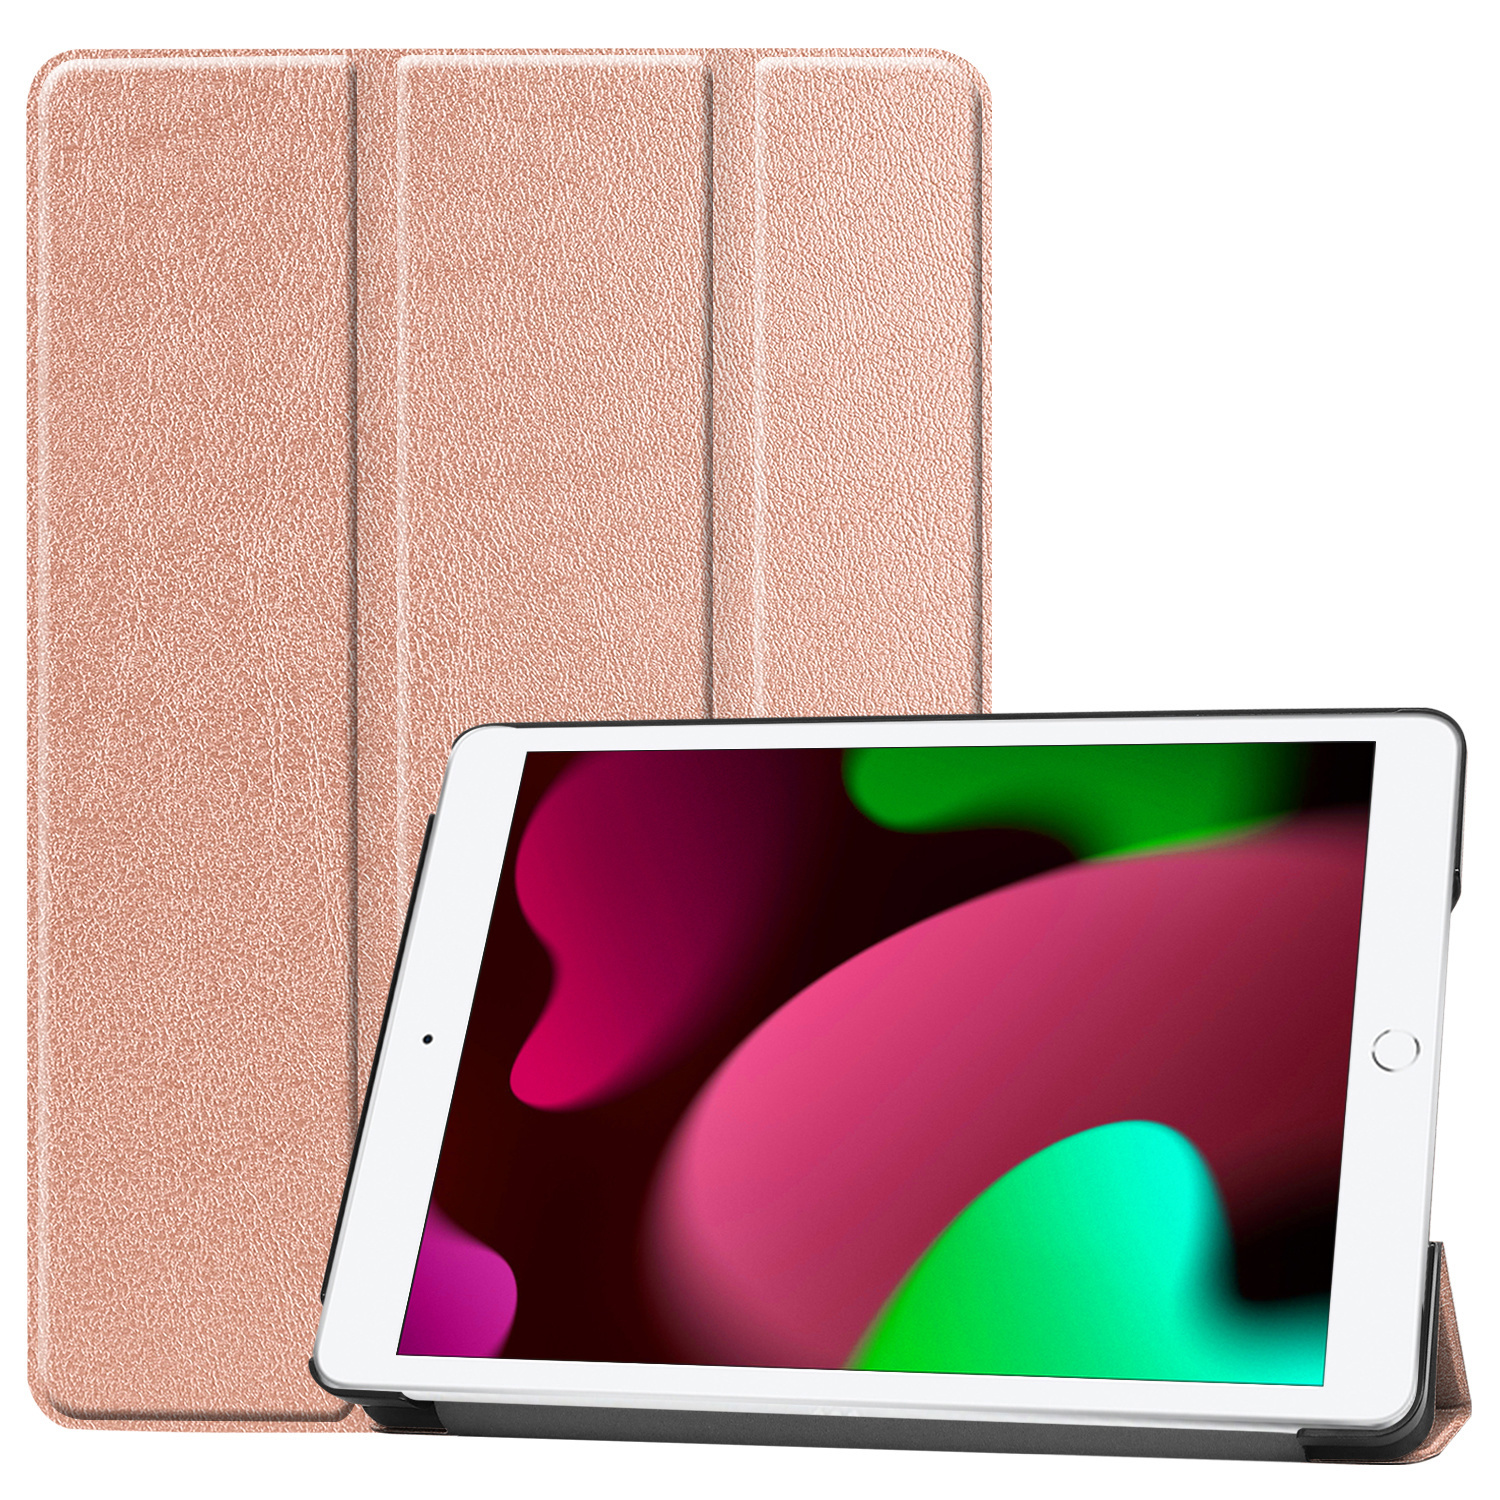 Nomfy iPad 10.2 2019 Hoesje Book Case Hoes - iPad 10.2 2019 Hoes Hardcover Case Hoesje - Rose Goud